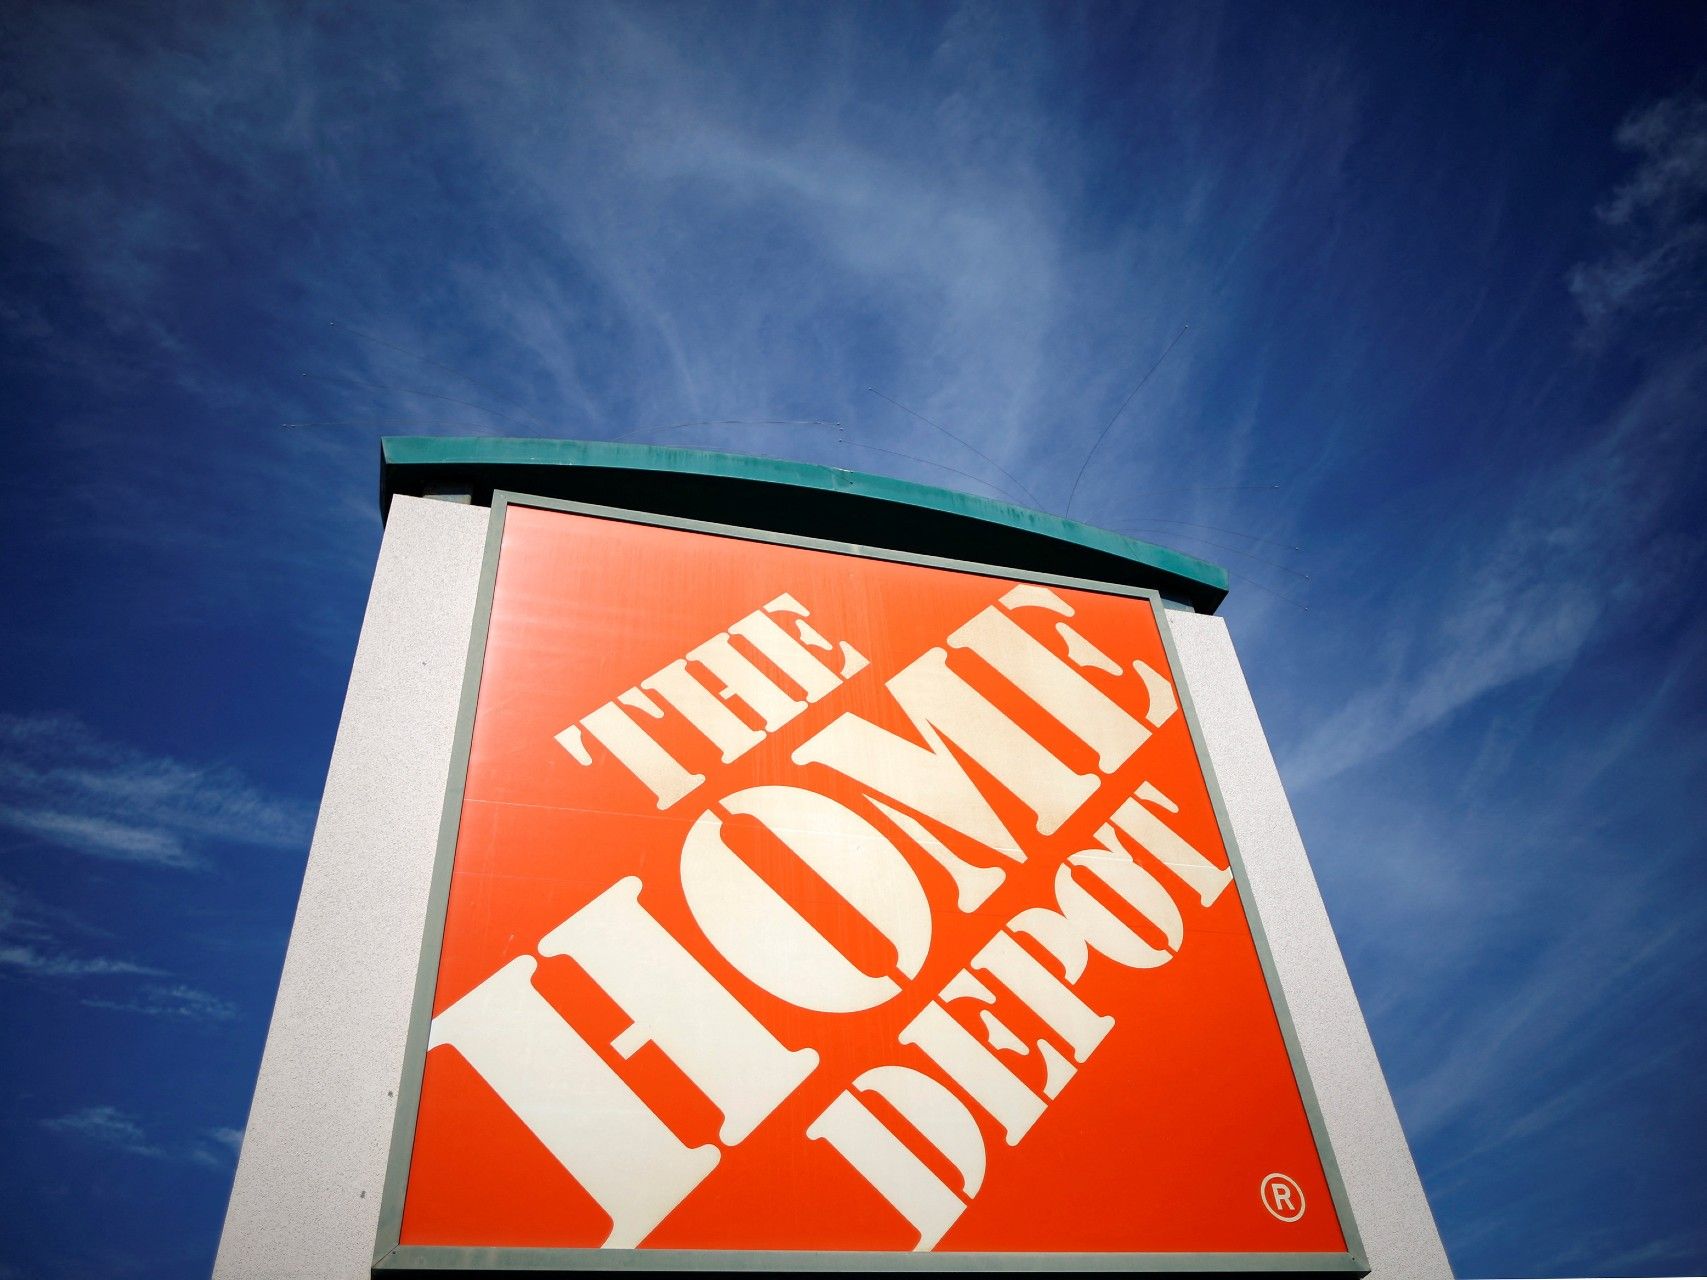 Home Depot shared customer data with Meta for years without consent: Privacy commissioner